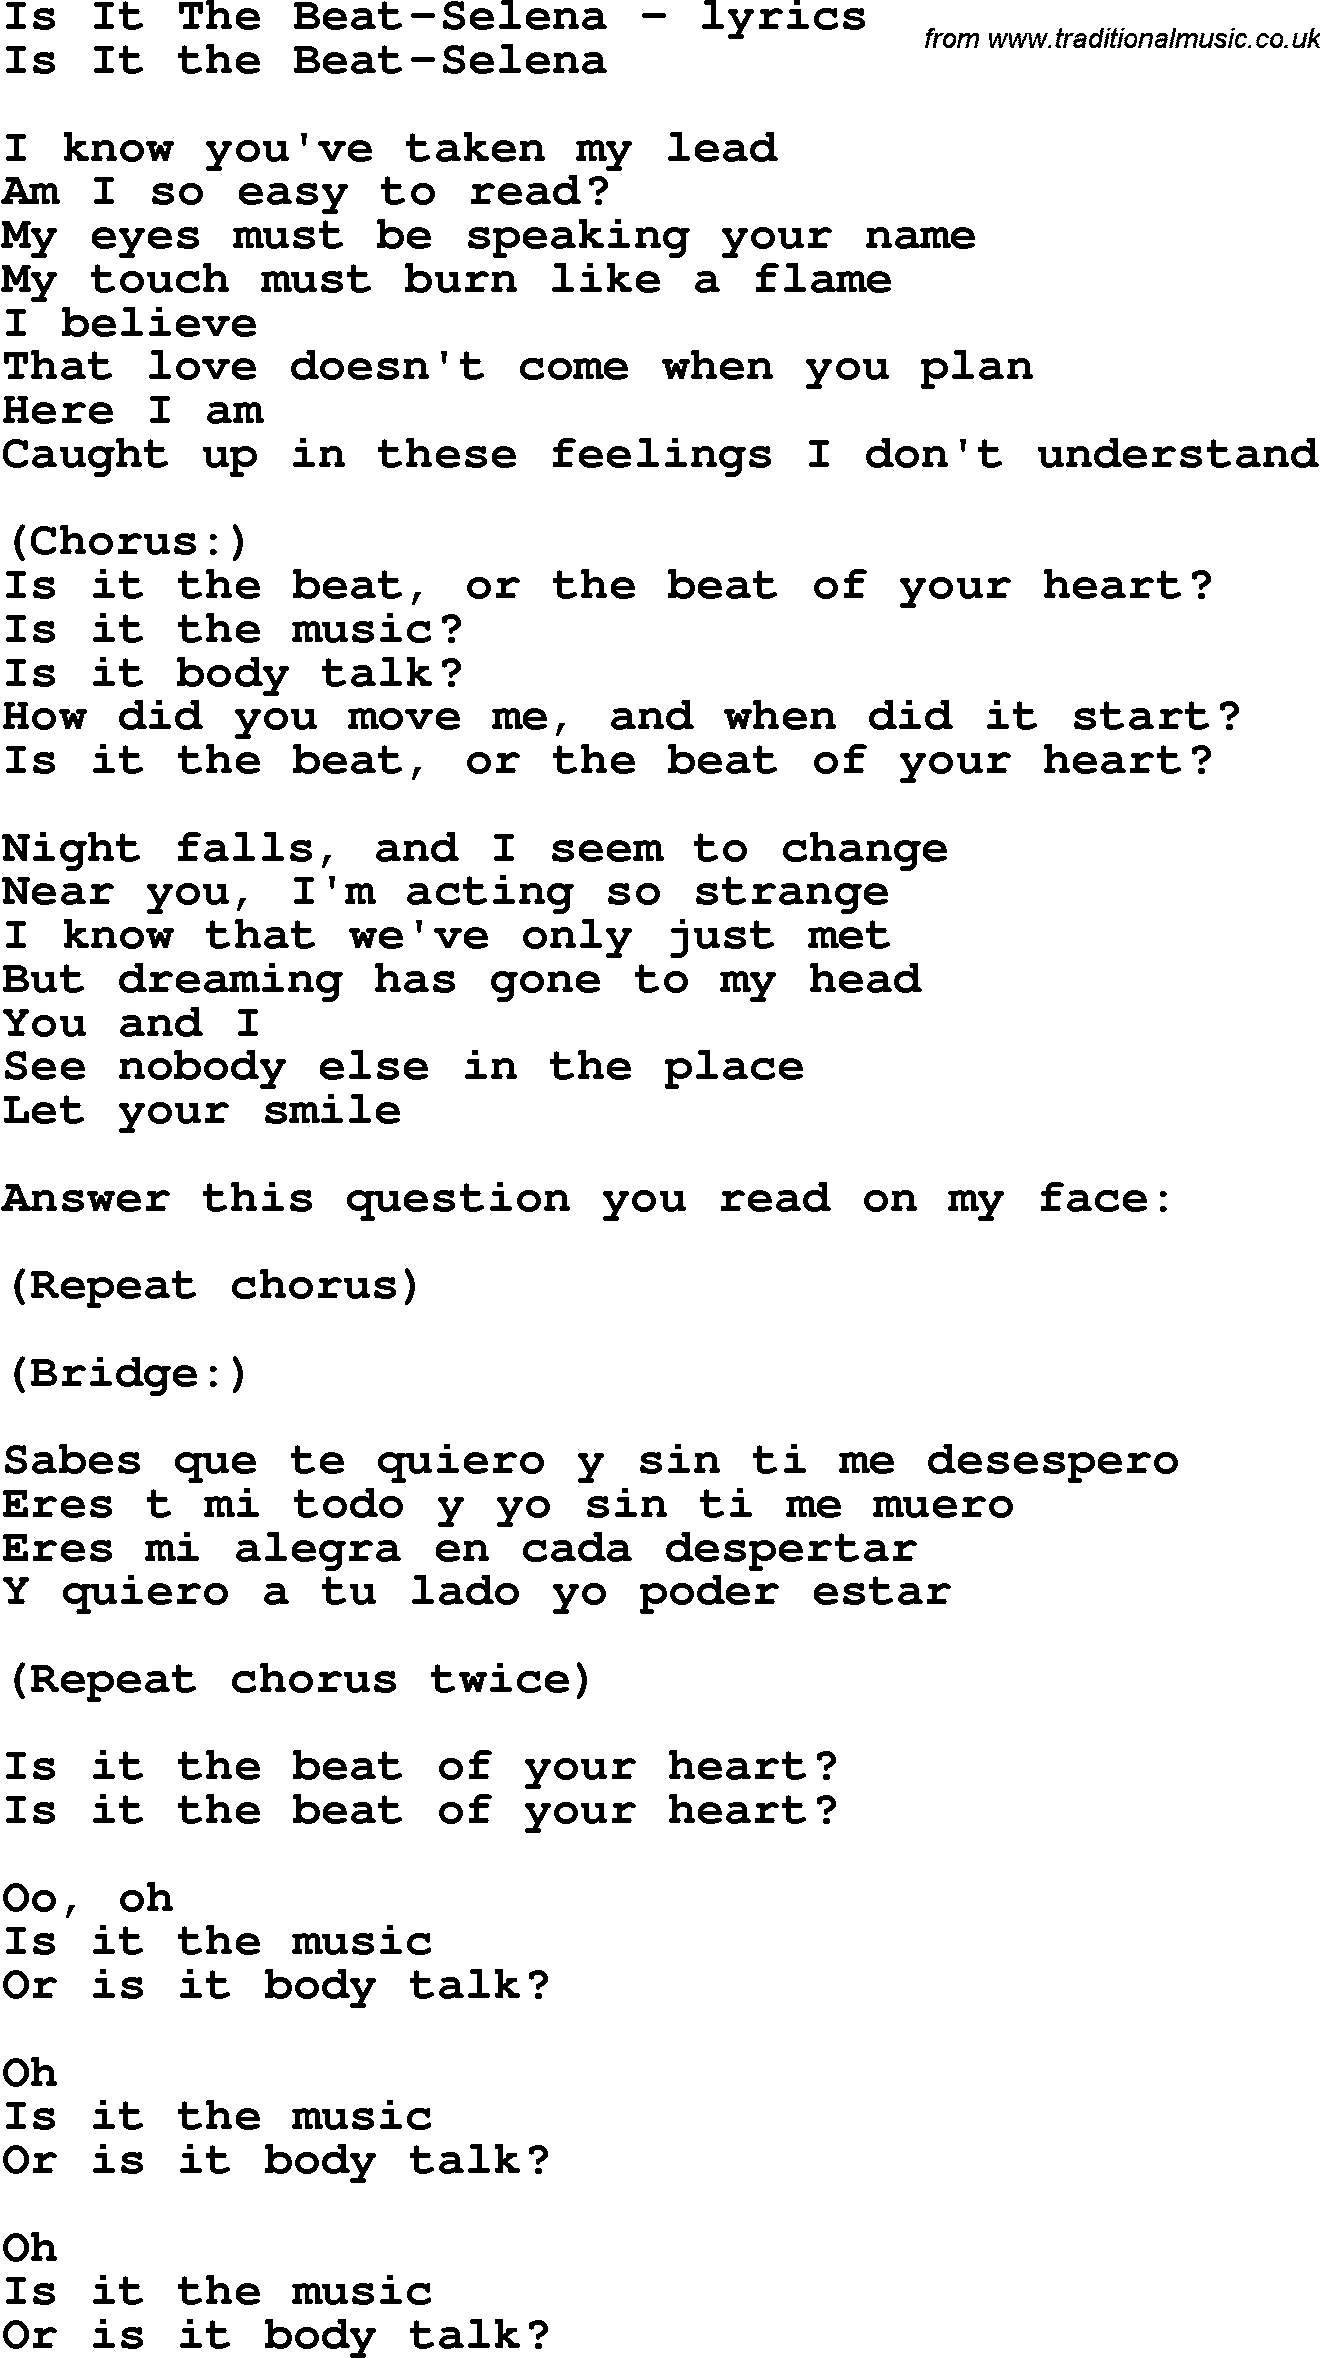 Love Song Lyrics for: Is It The Beat-Selena